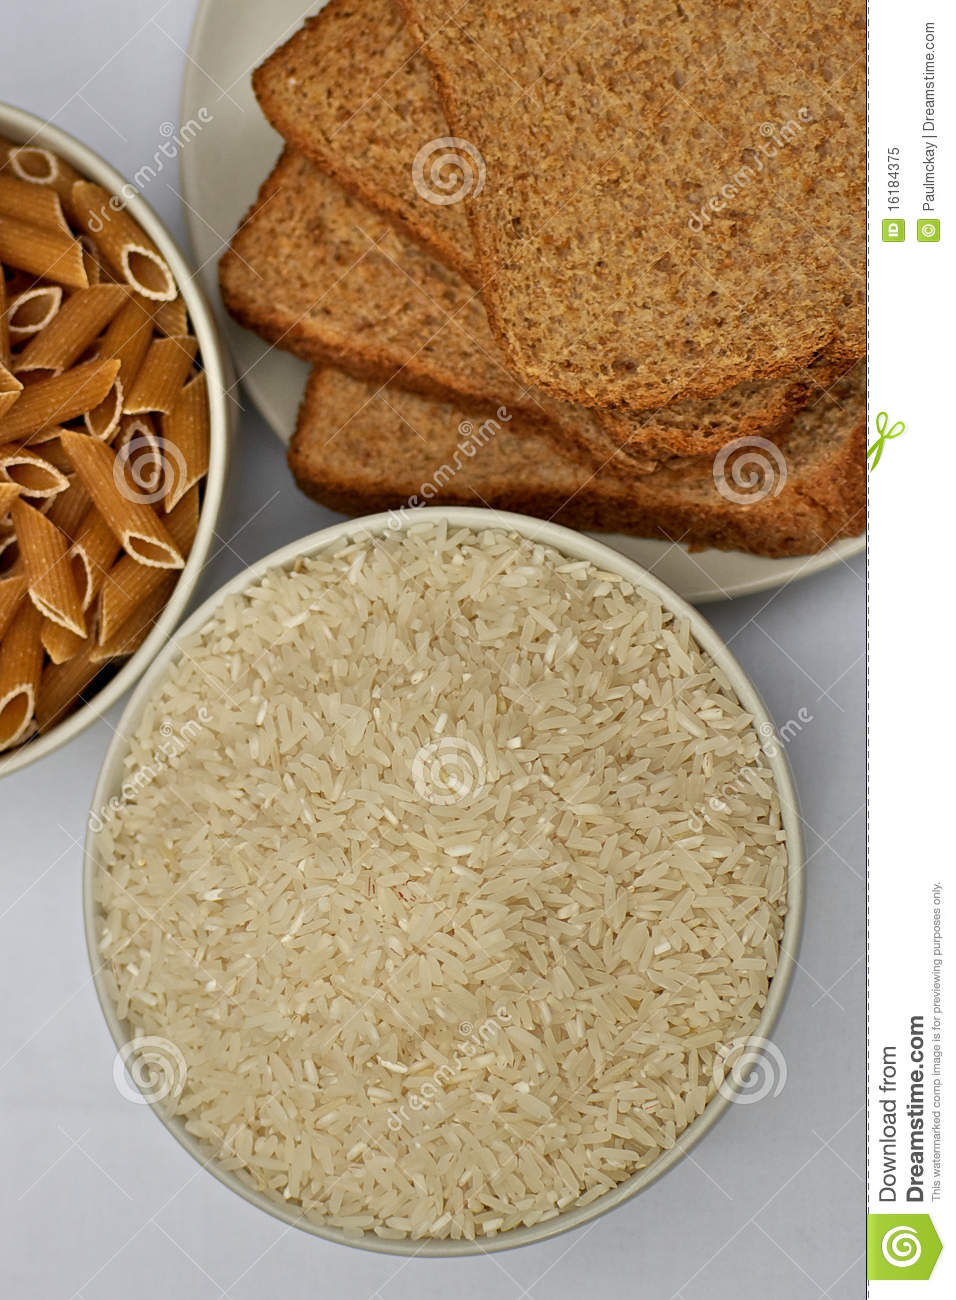 White Rice And Wholewheat Pasta In Small Bowls With 3 Slices Of    